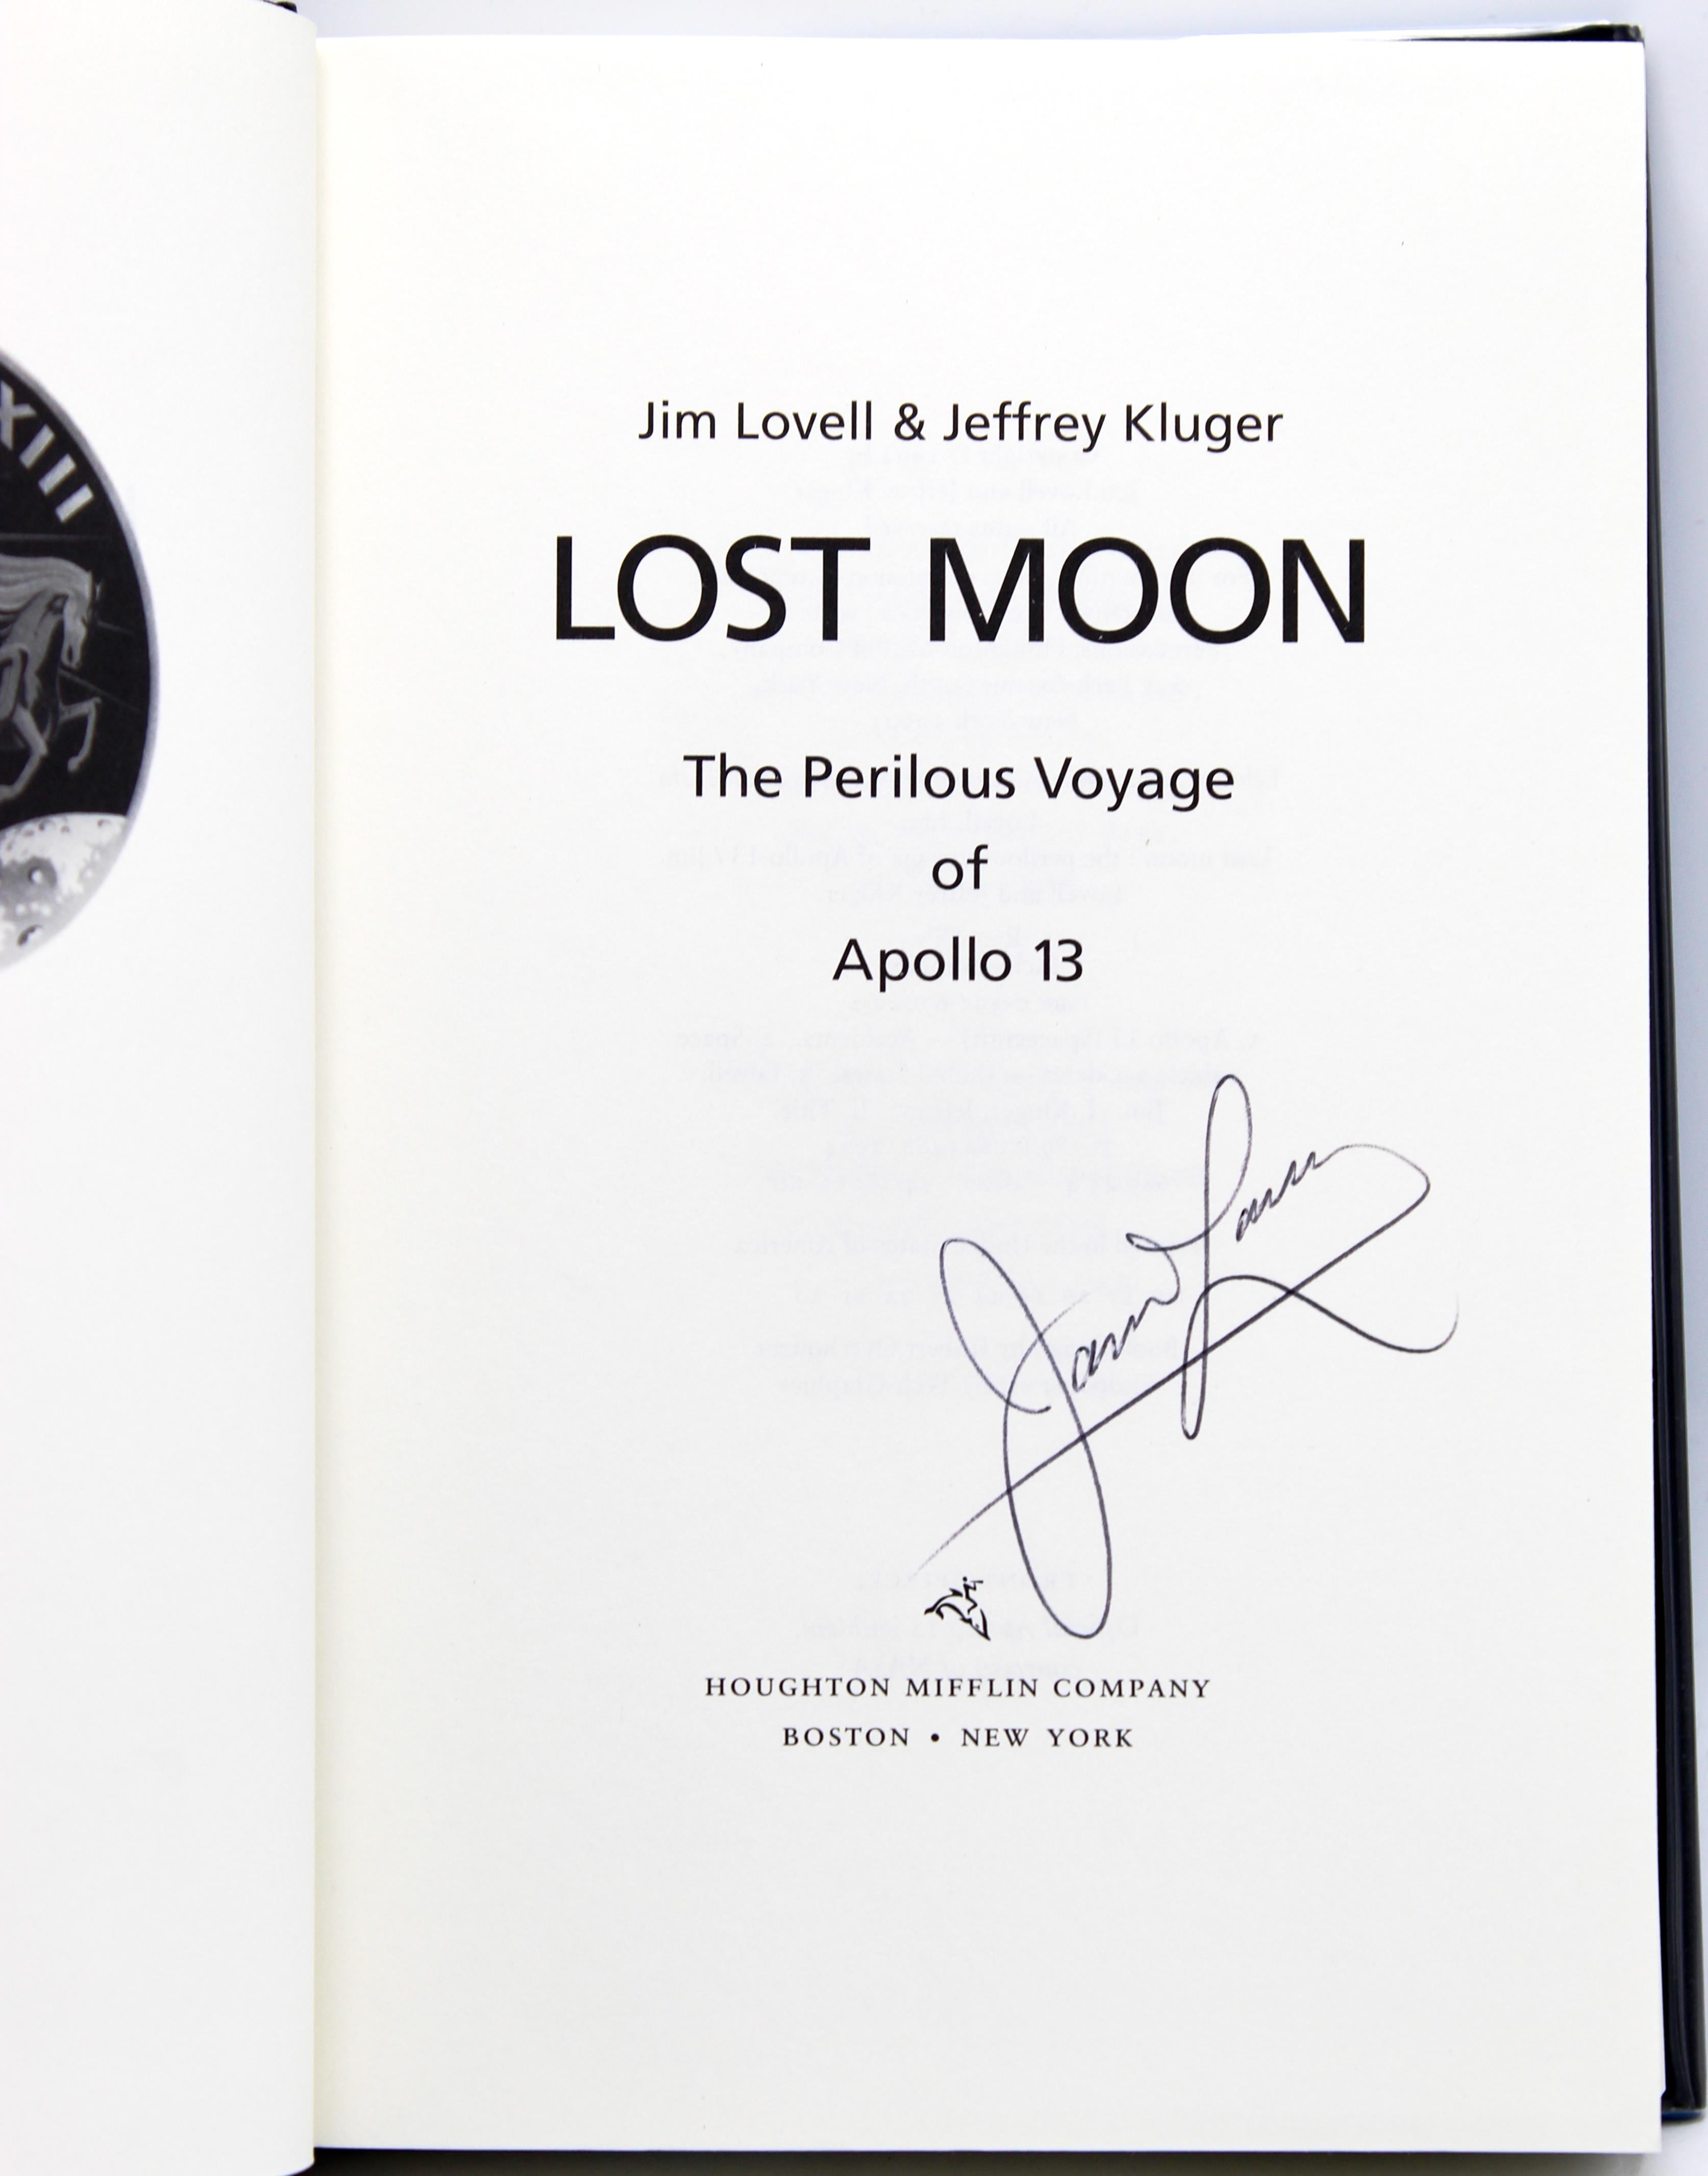 Lovell, Jim and Jeffrey Kluger. Lost Moon: The Perilous Voyage of Apollo 13. New York: Houghton Mifflin Company, 1994. Signed and inscribed by Jim Lovell on title page. Later printing, octavo, original dust jacket.

Lost Moon, co-authored with